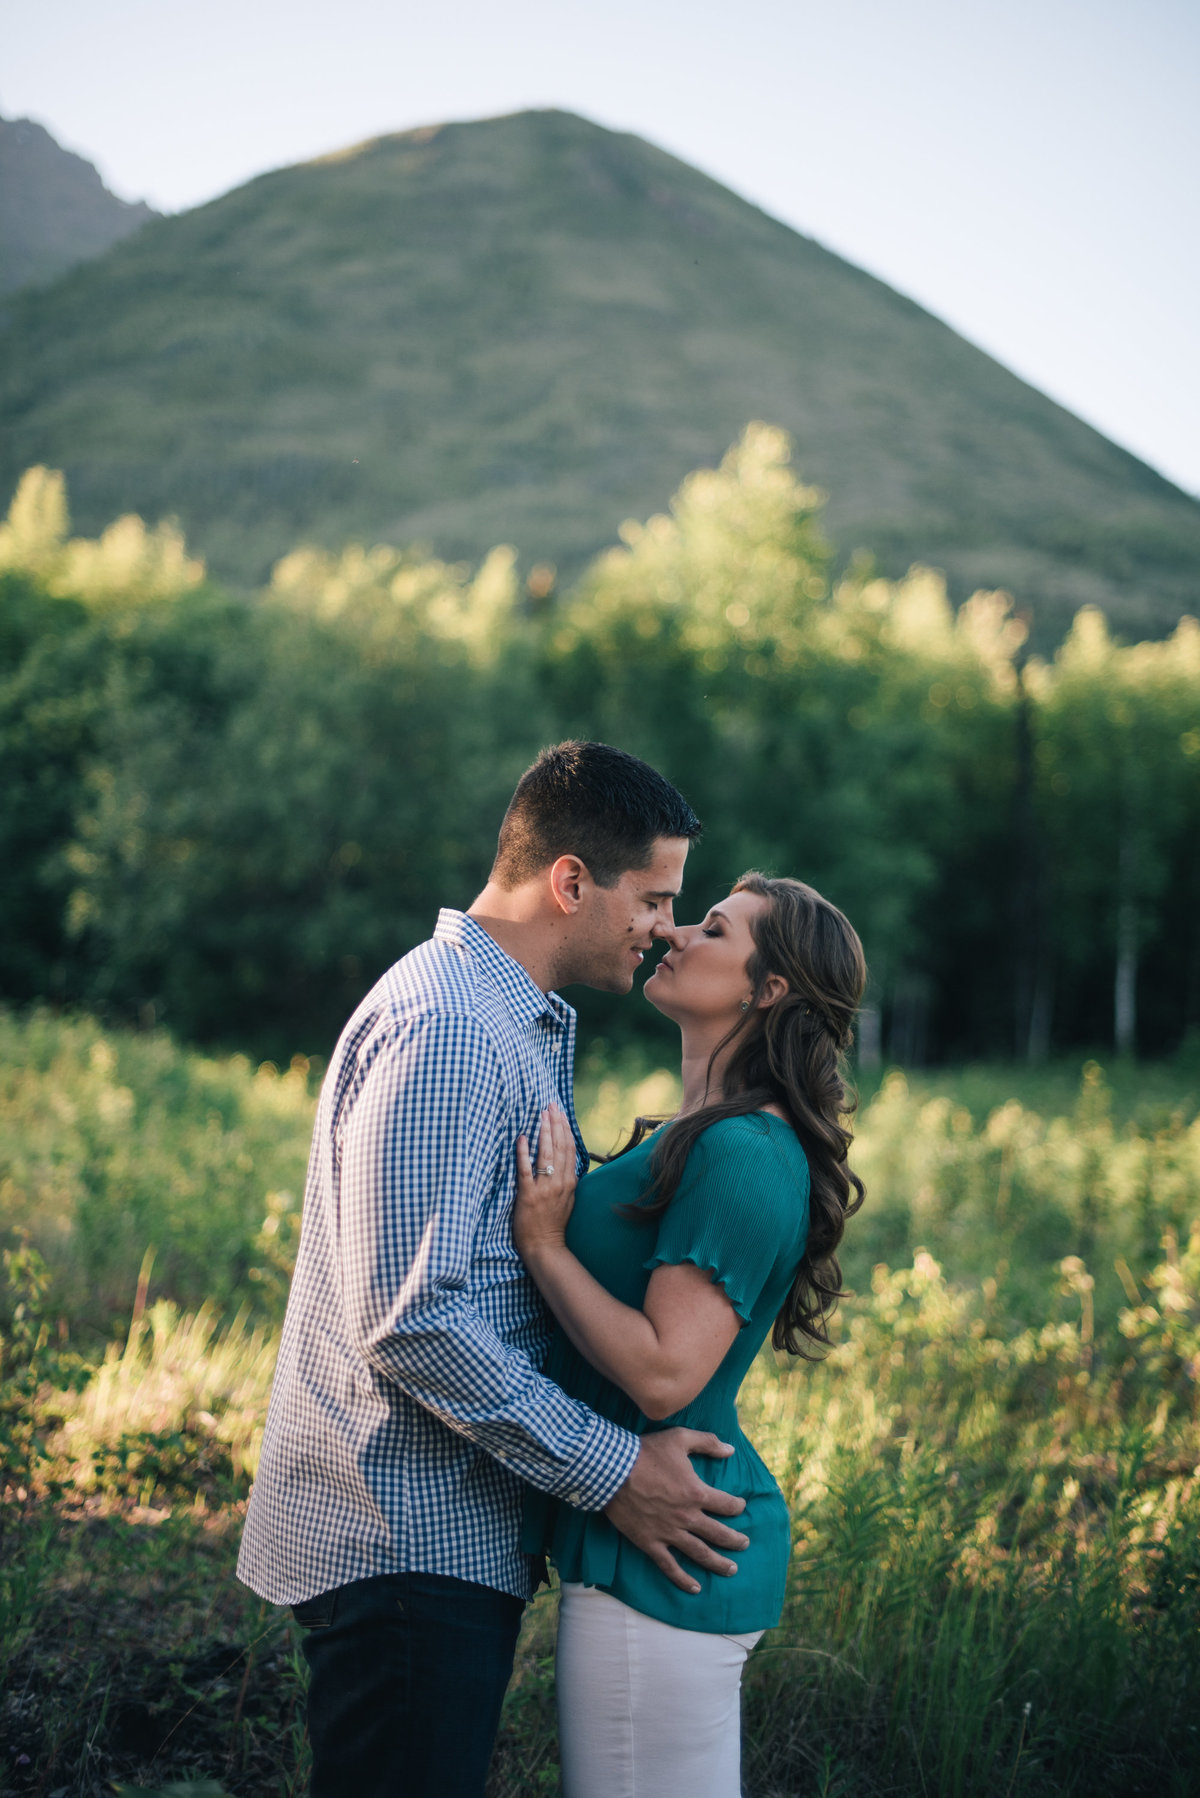 028_Erica Rose Photography_Anchorage Engagement Photographer